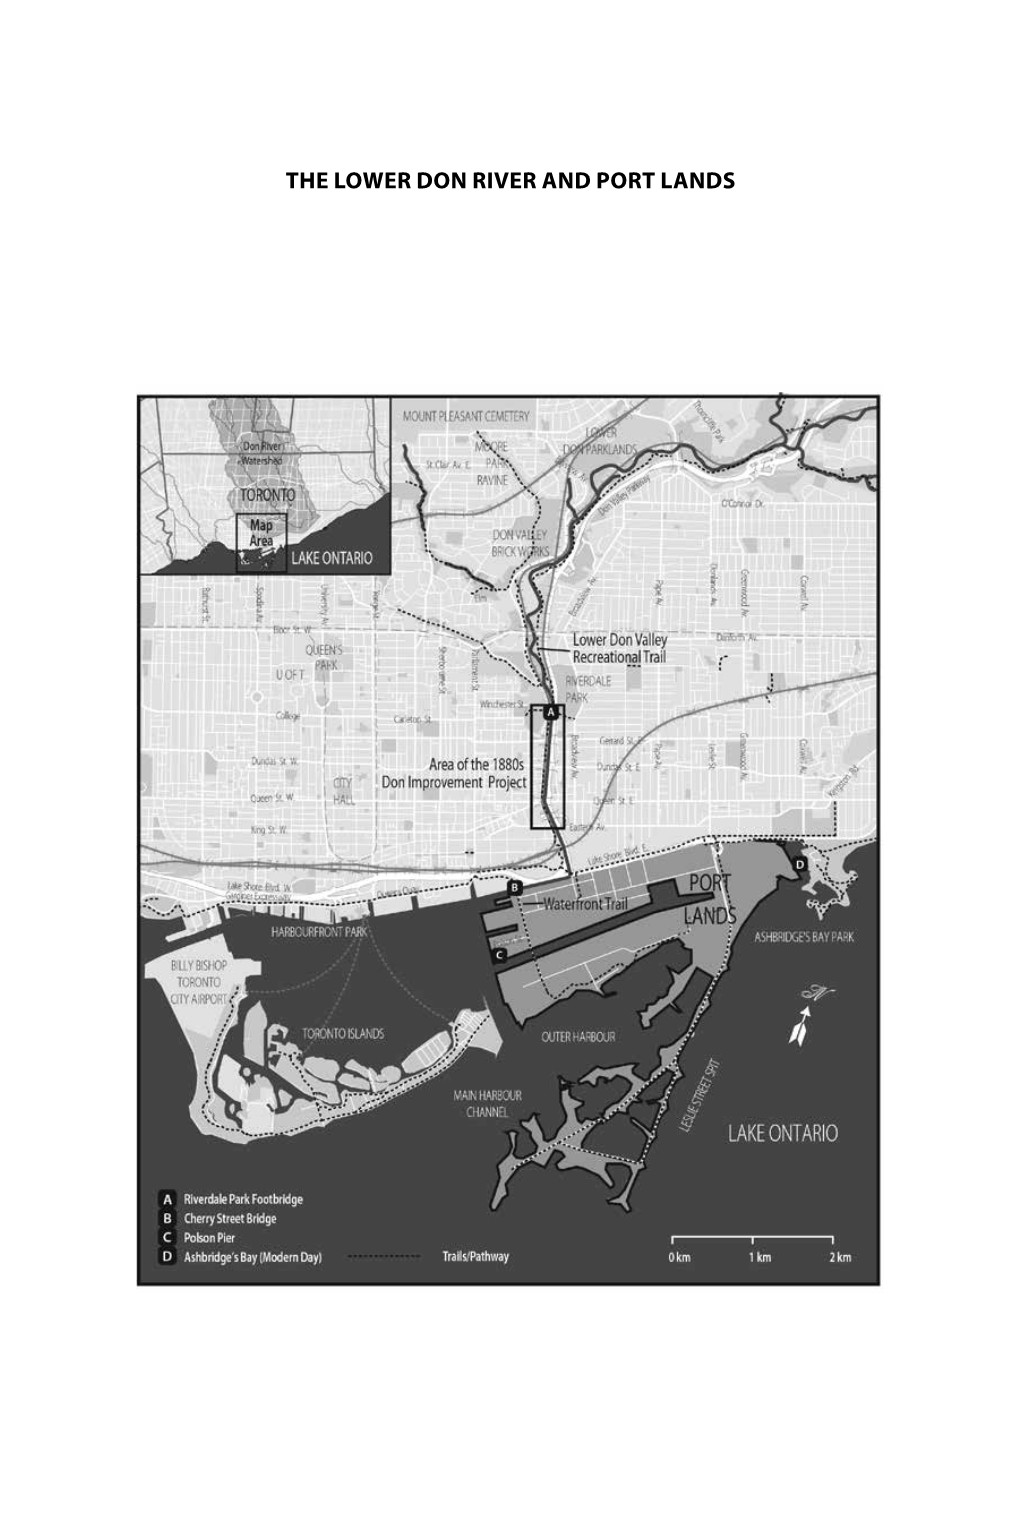 Toronto's Lower Don River and Port Lands